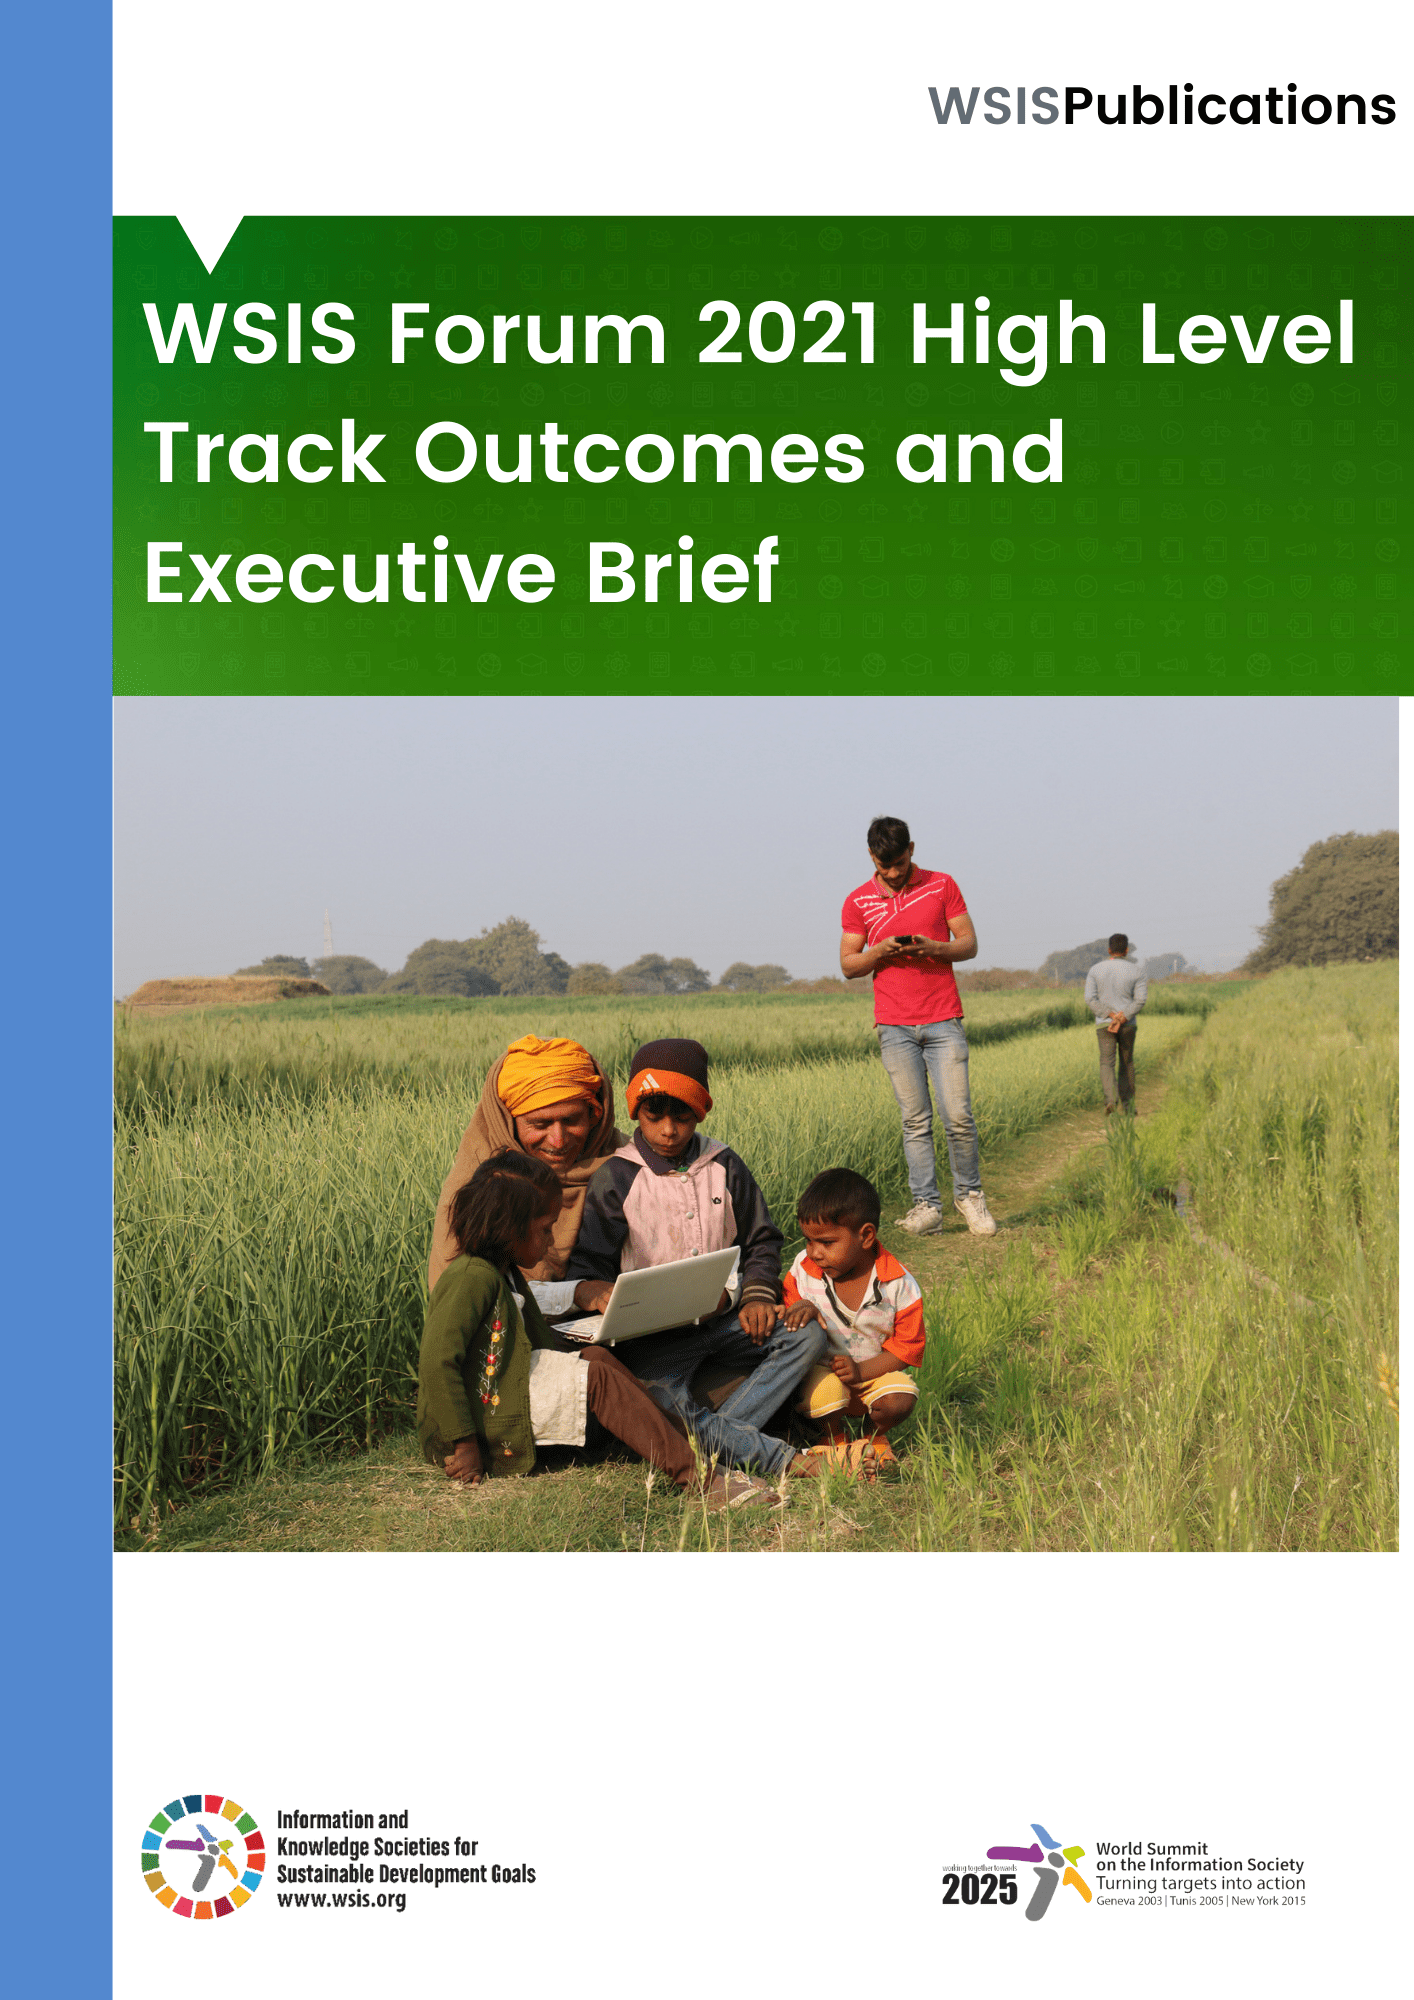 WSIS Forum 2021 High Level Track Outcomes and Executive Brief